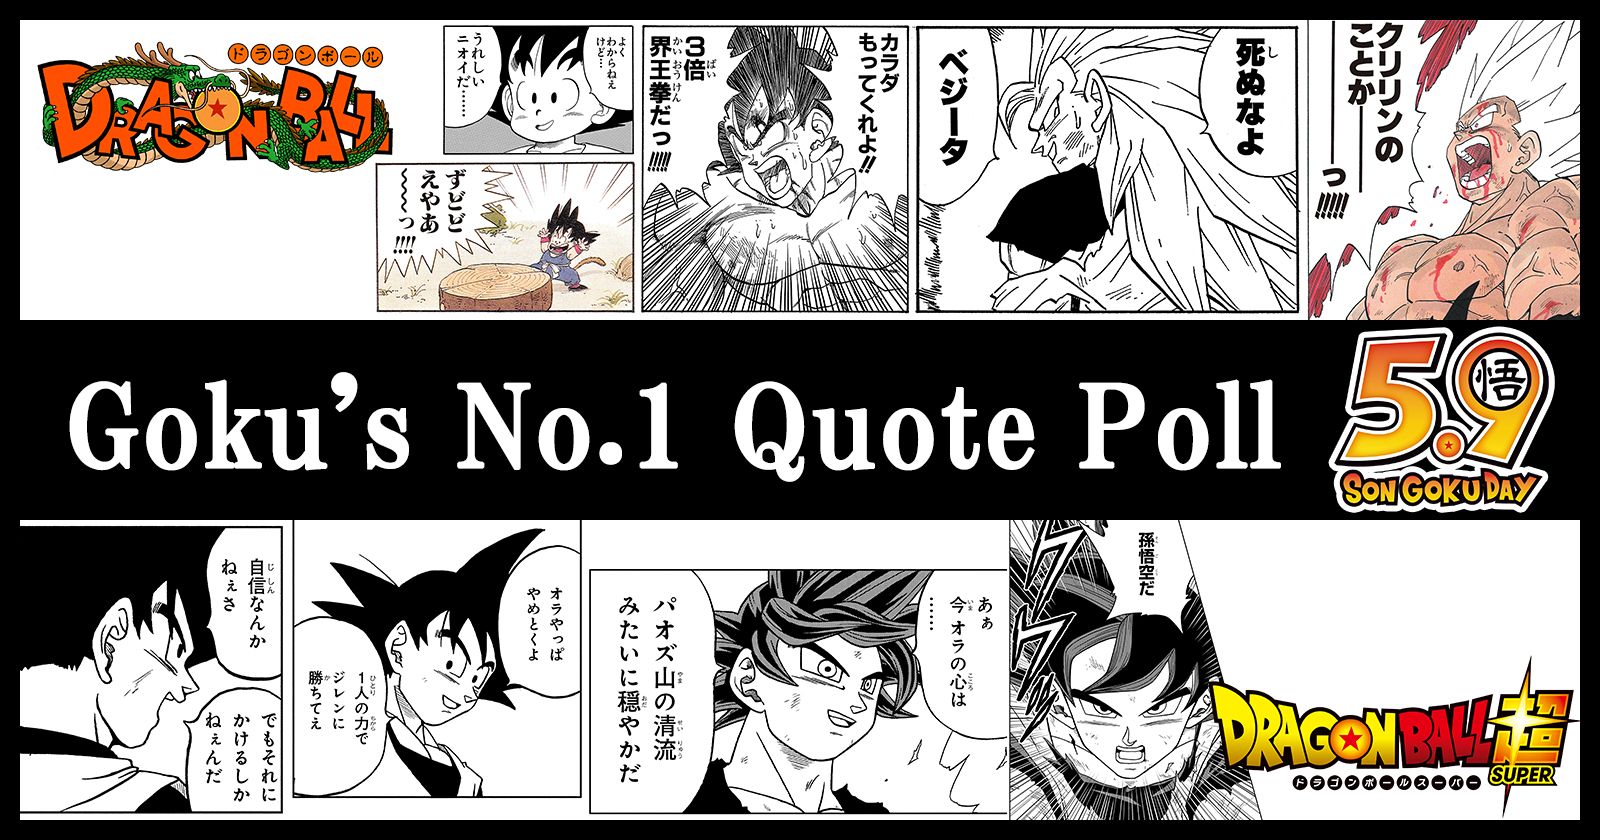 Goku's No.1 Quote Poll On Now to Celebrate Goku Day!! 1st Place to Be Turned into Real Merch!